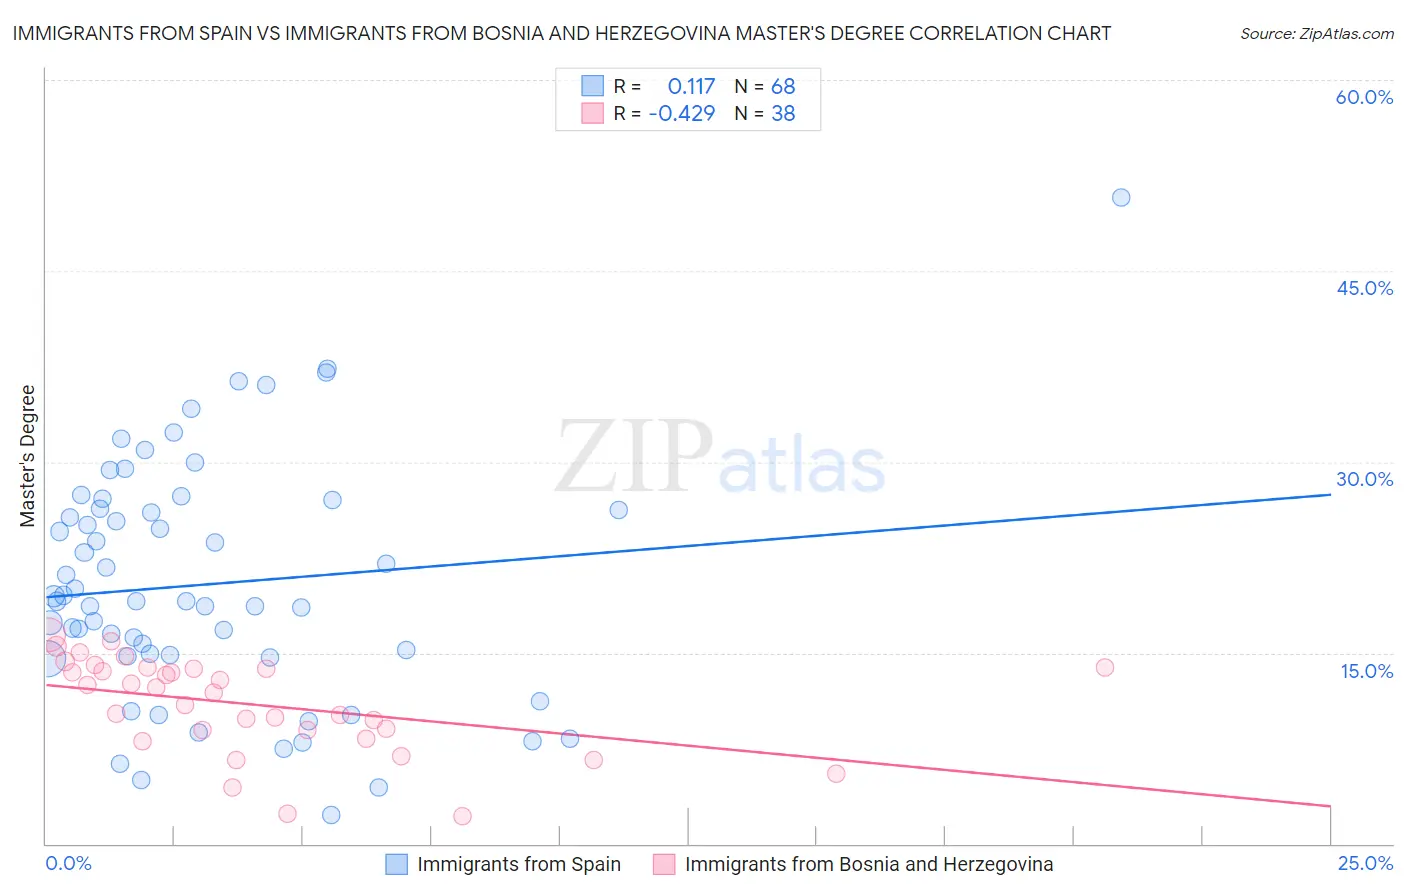 Immigrants from Spain vs Immigrants from Bosnia and Herzegovina Master's Degree